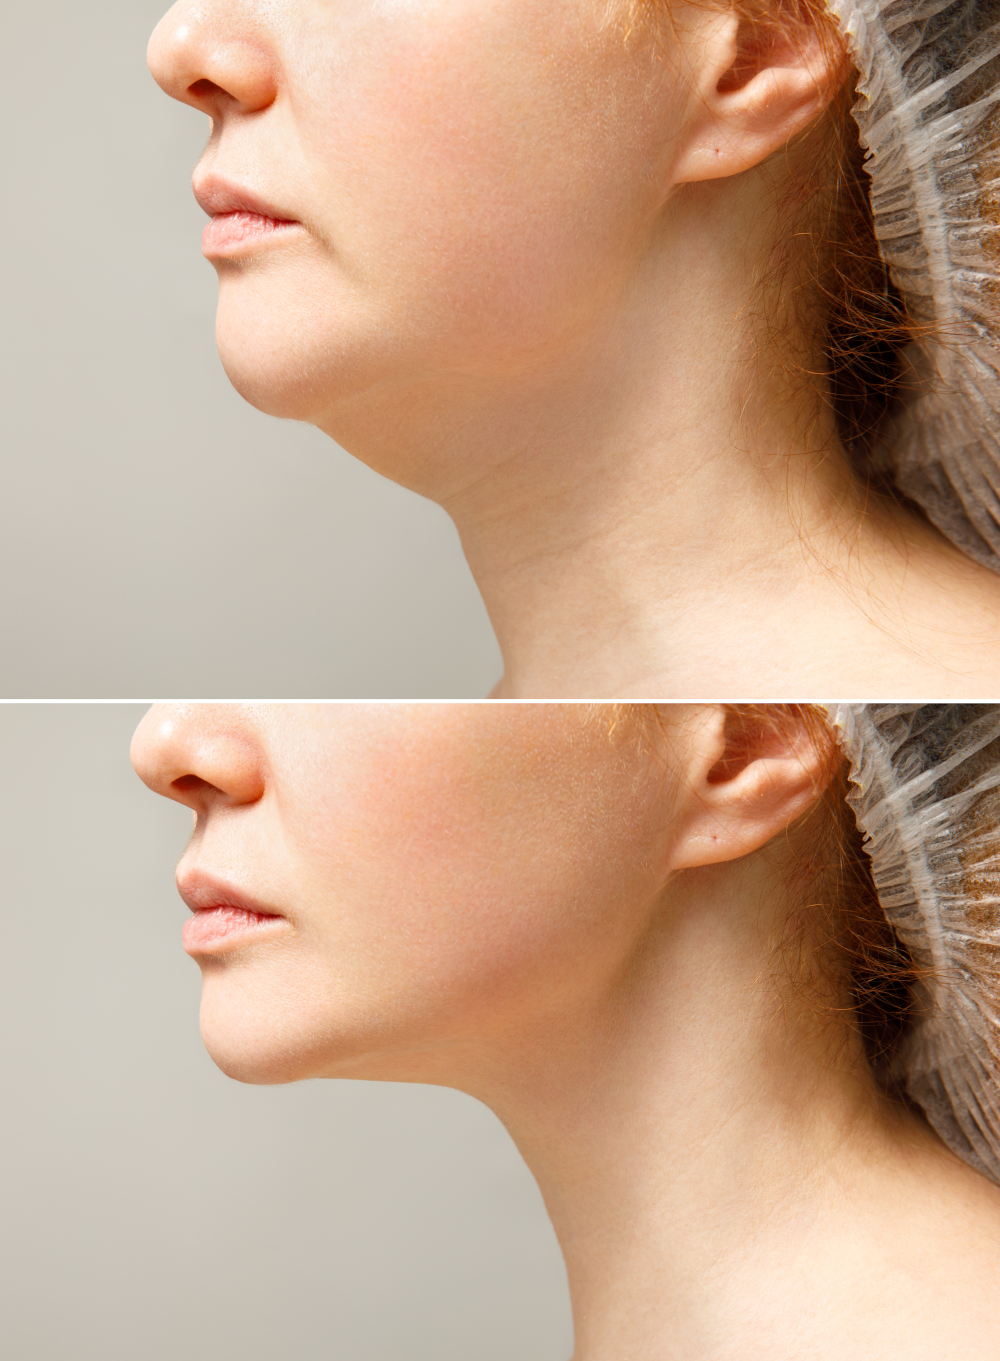 What are the benefits and risks of Kybella?